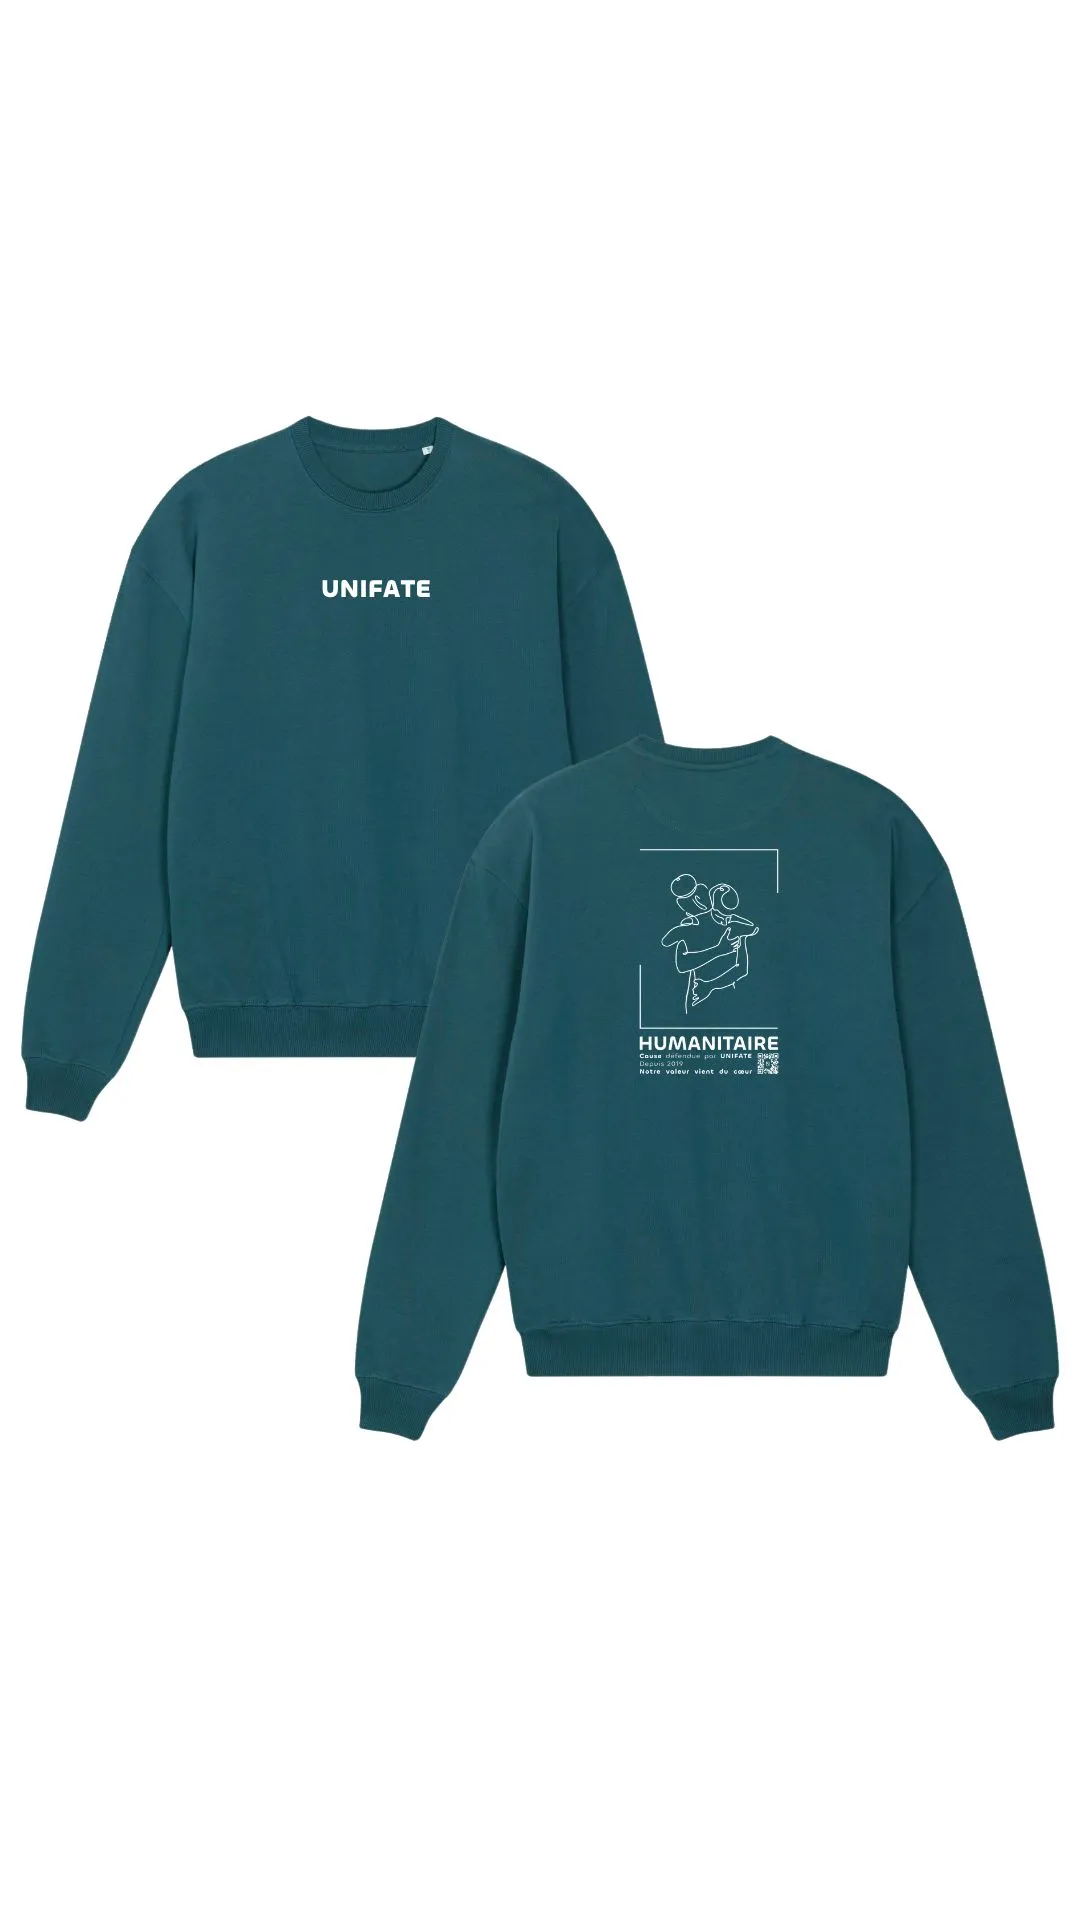 unifate-marque-responsable-rennes-collection-humanitaire-ete-sweat-turquoise